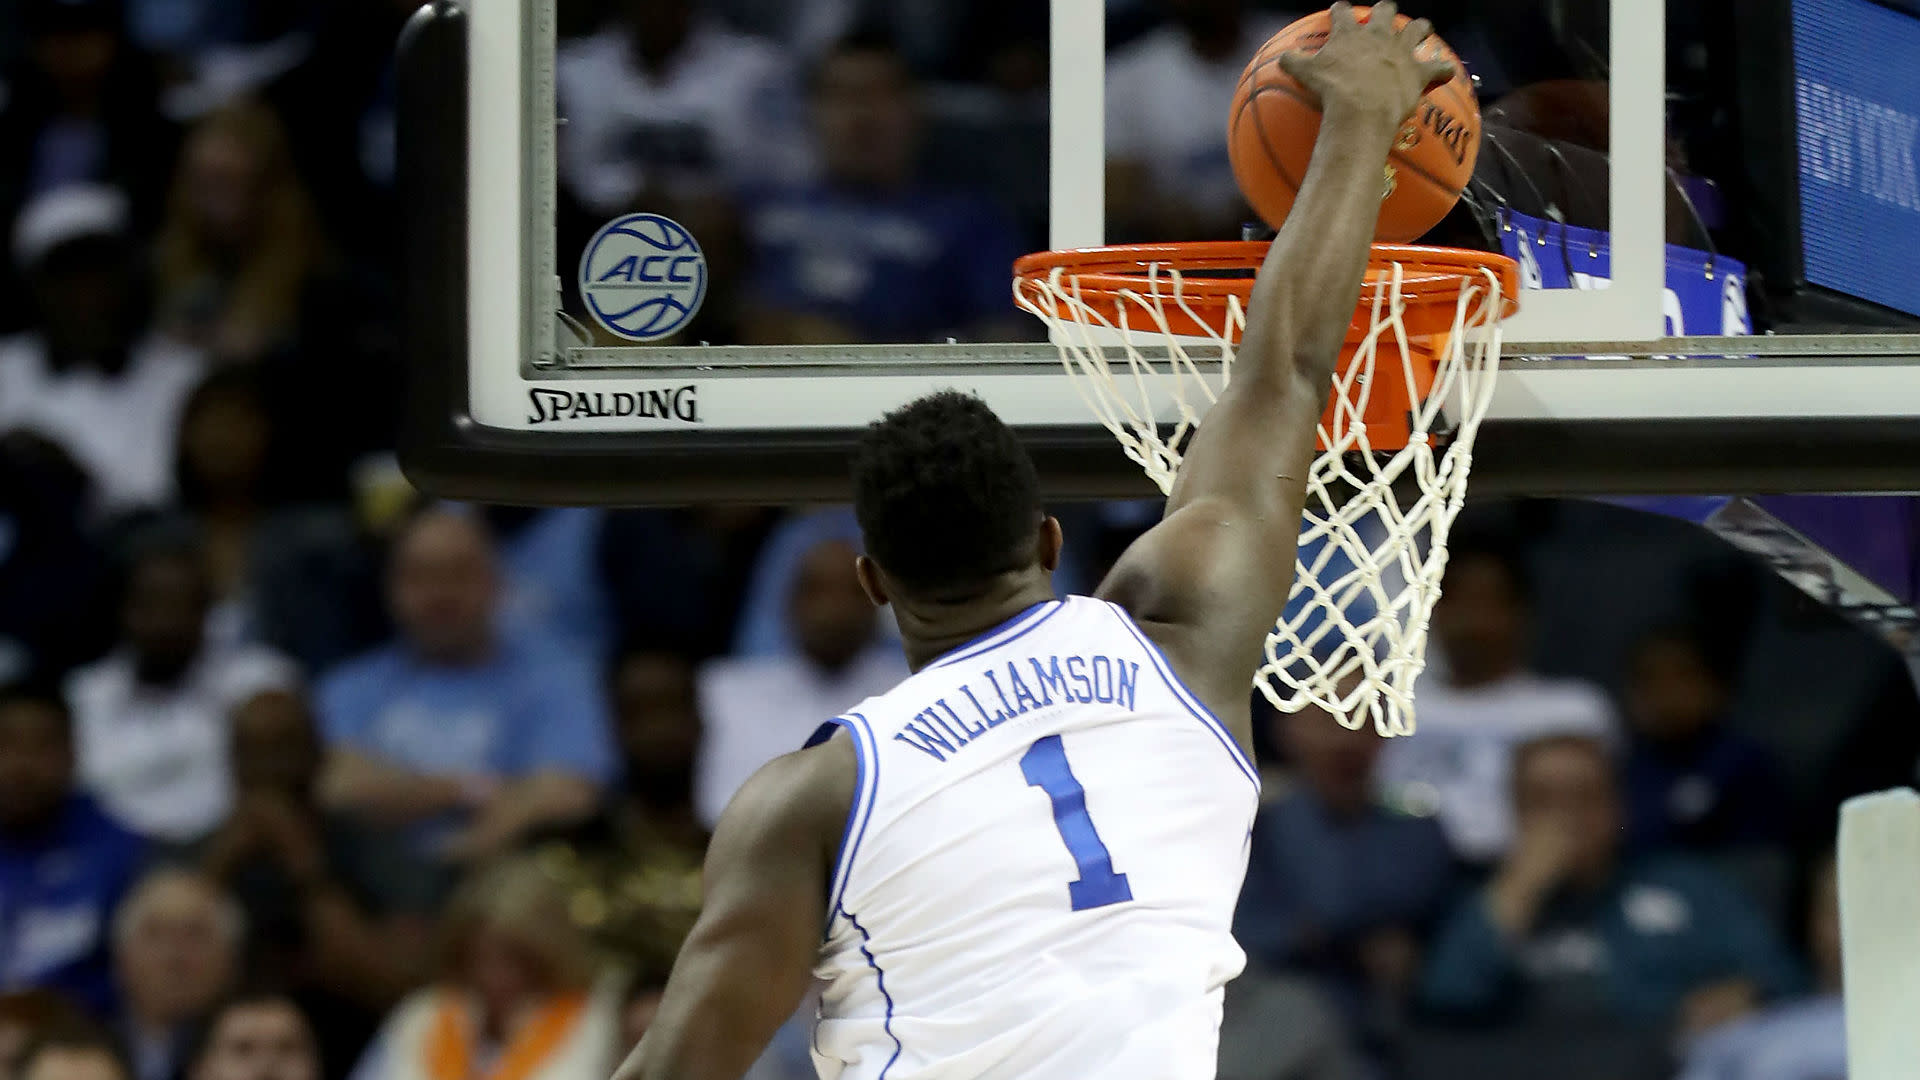 Zion Williamson and five other stars to watch during March Madness1920 x 1080